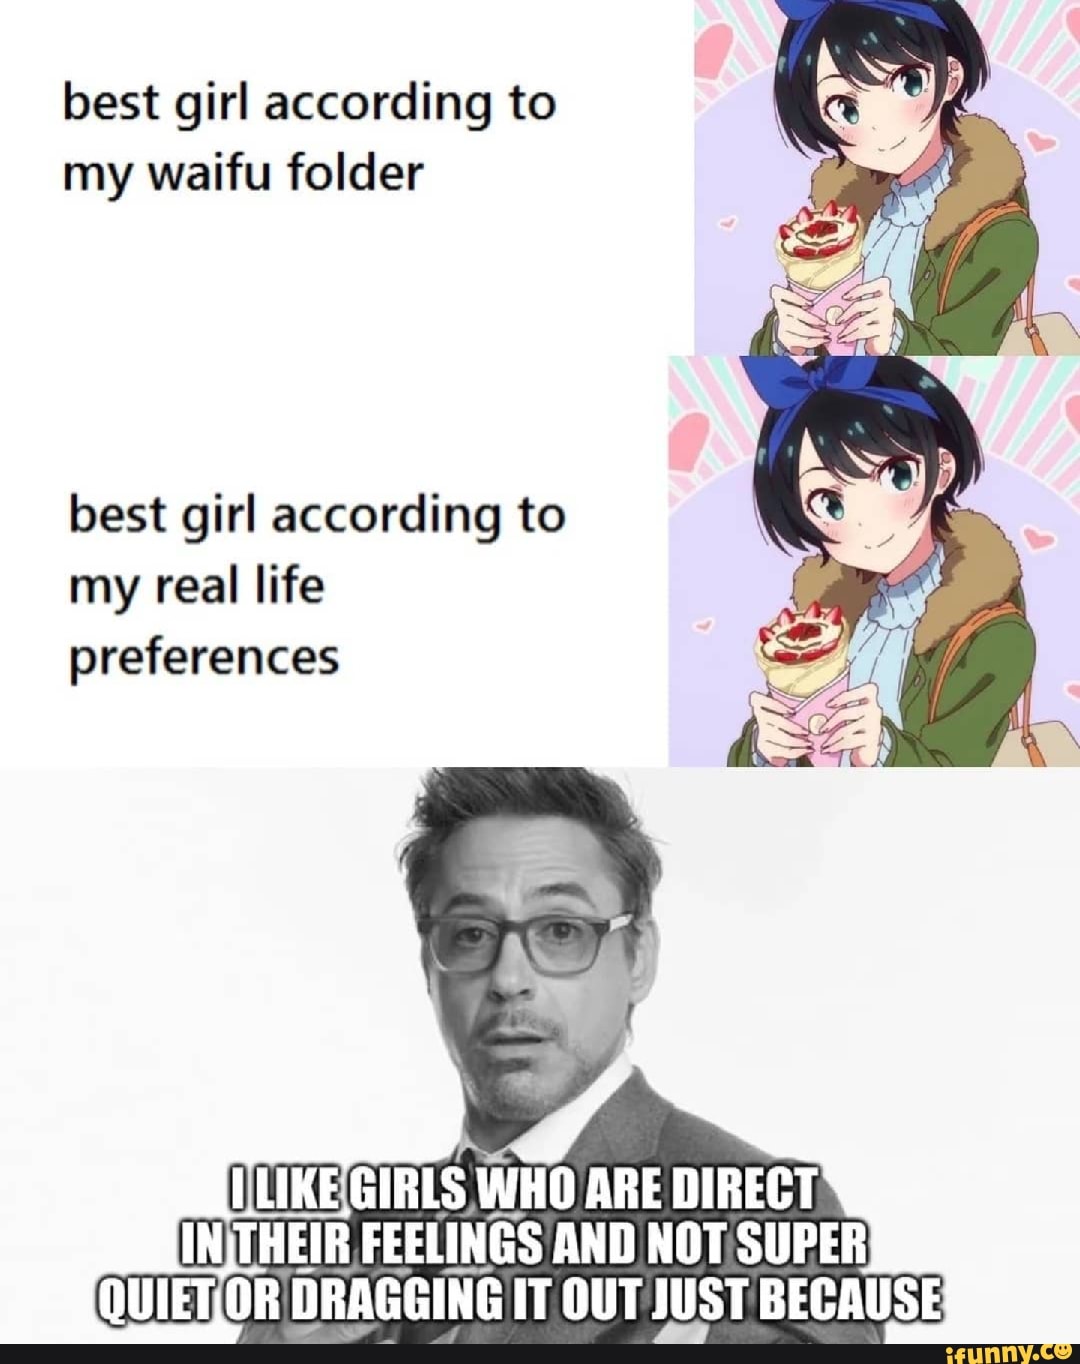 Best girl according to my waifu folder best girl according to my real life  preferences GIRLS WHO ARE DIRECT INITHEIR, FEELINGS AND NOT SUPER DRAGGING  IT OUT JUST BECAUSE - iFunny Brazil